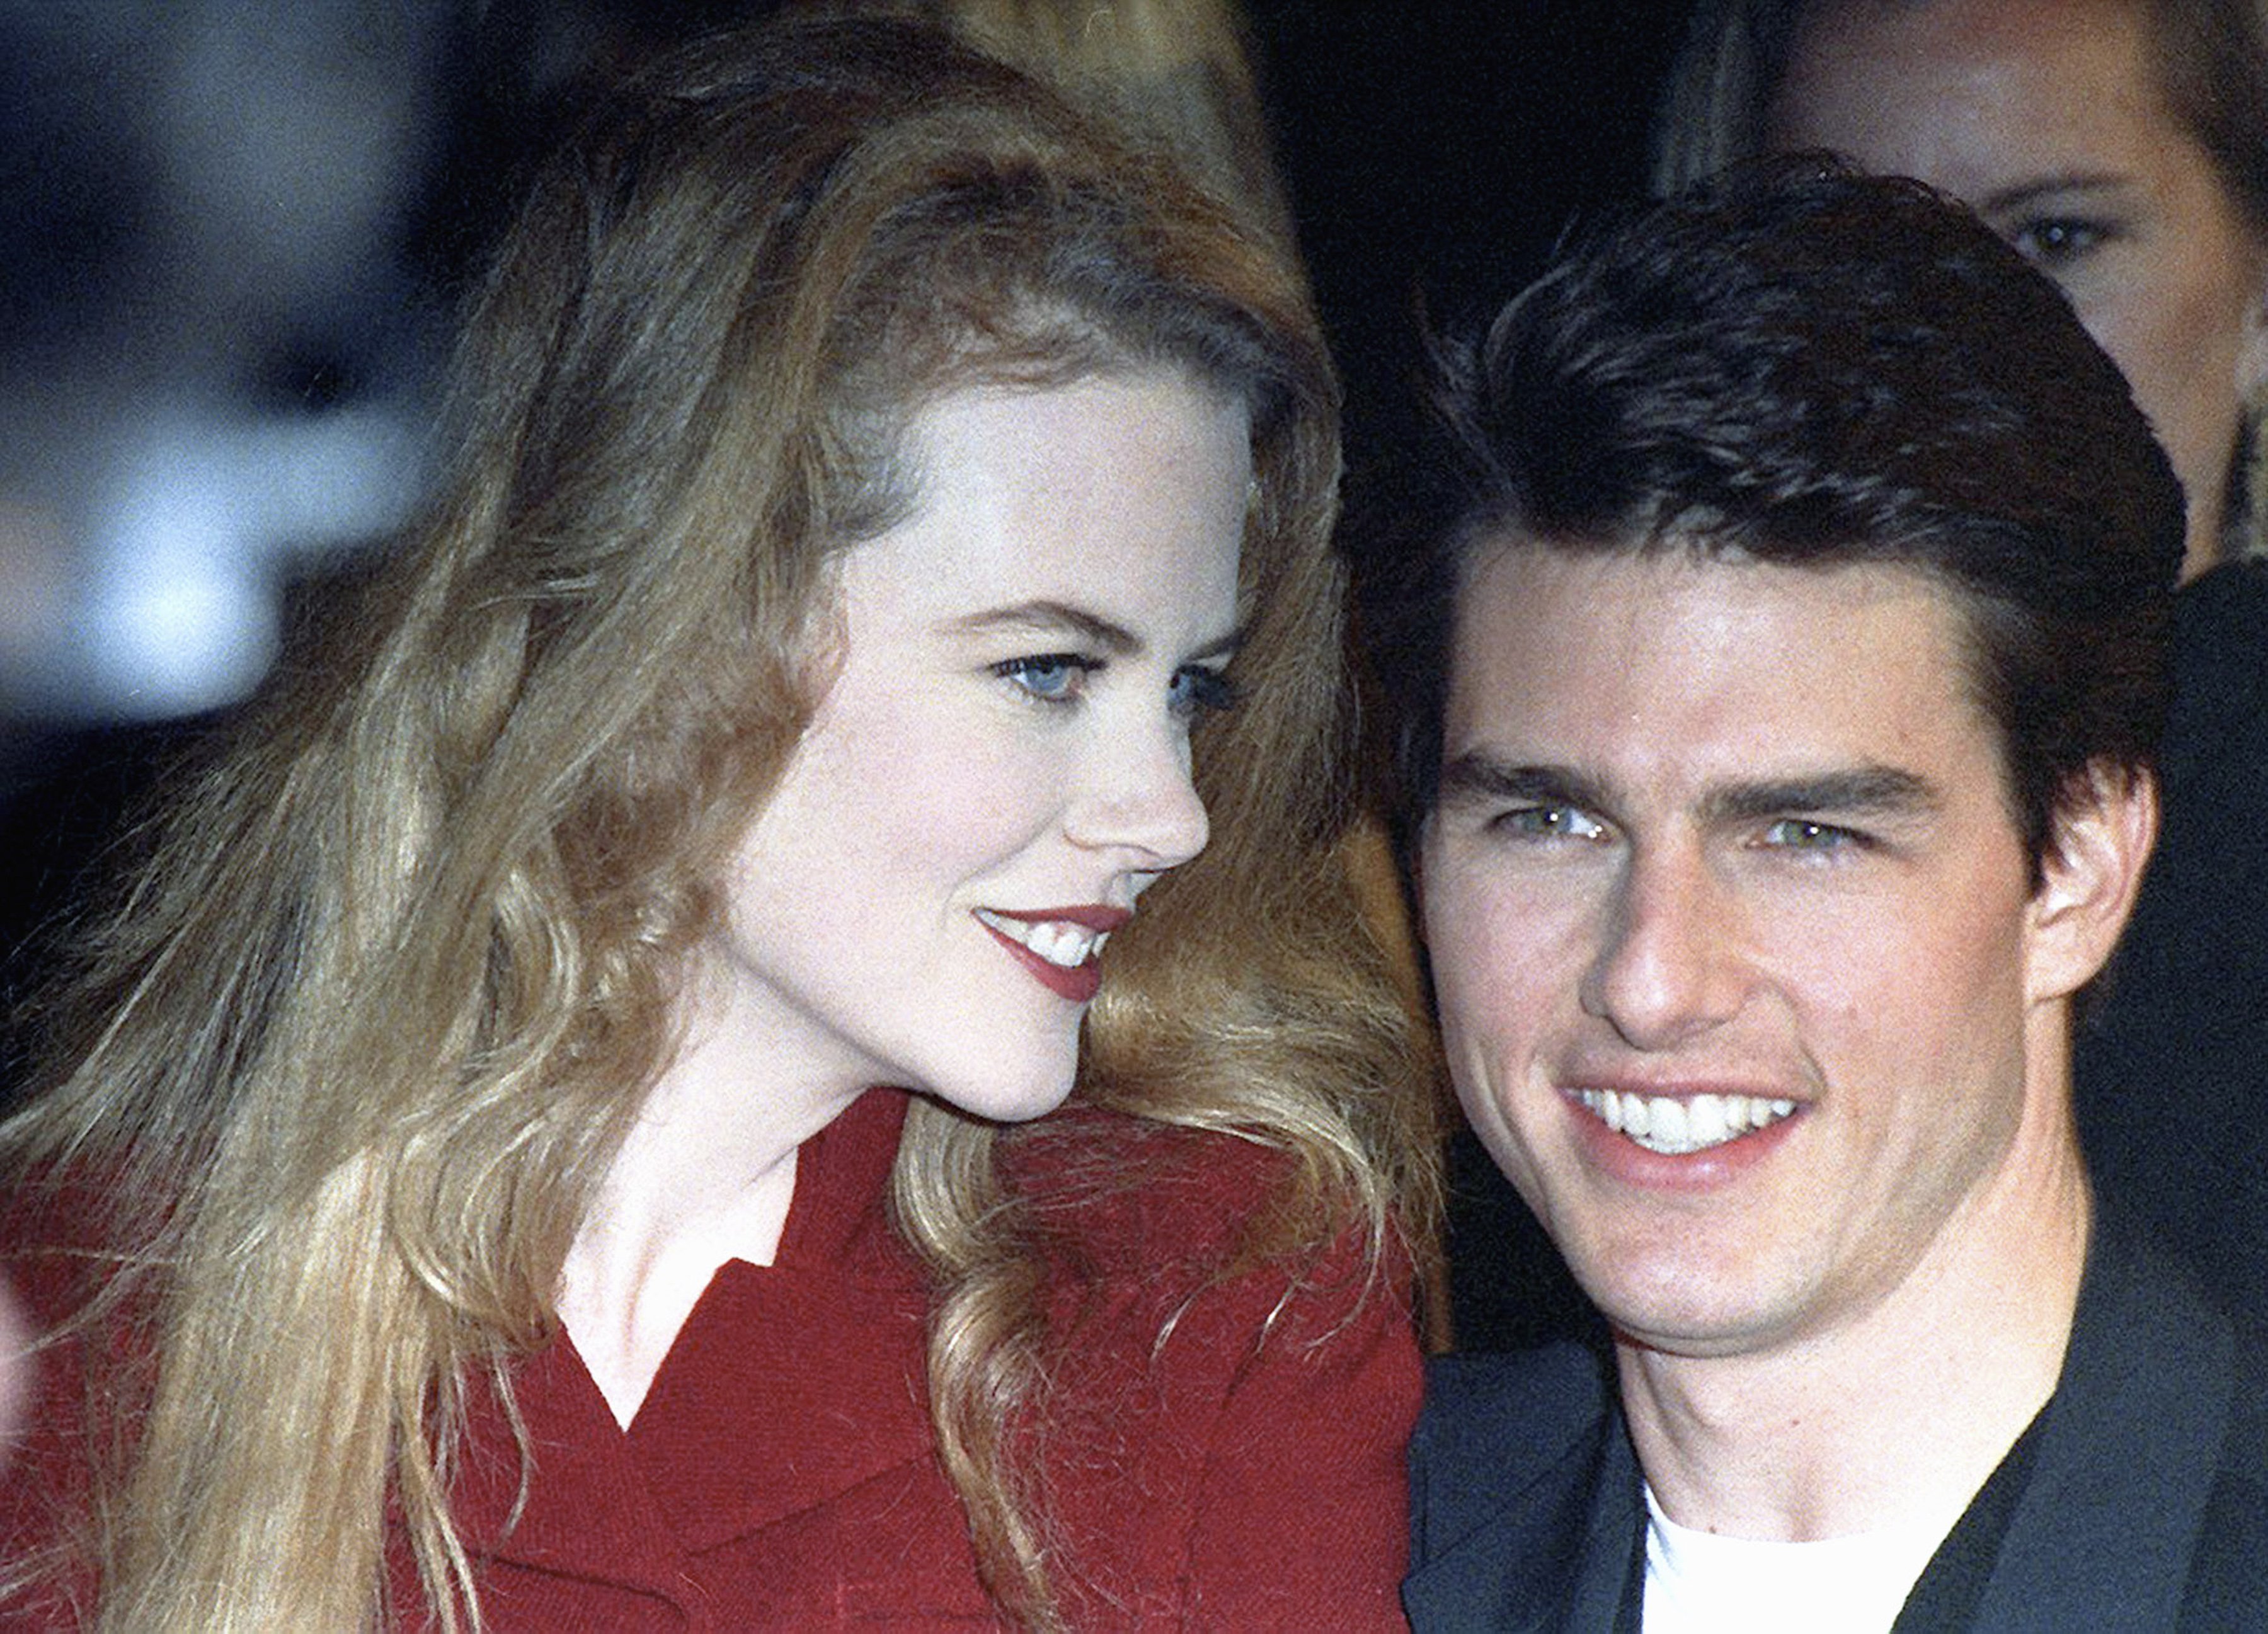 Nicole Kidman and Tom Cruise at the "A Few Good Men'" Westwood premiere at Mann Village Theatre in Westwood, California. | Source: Getty Images